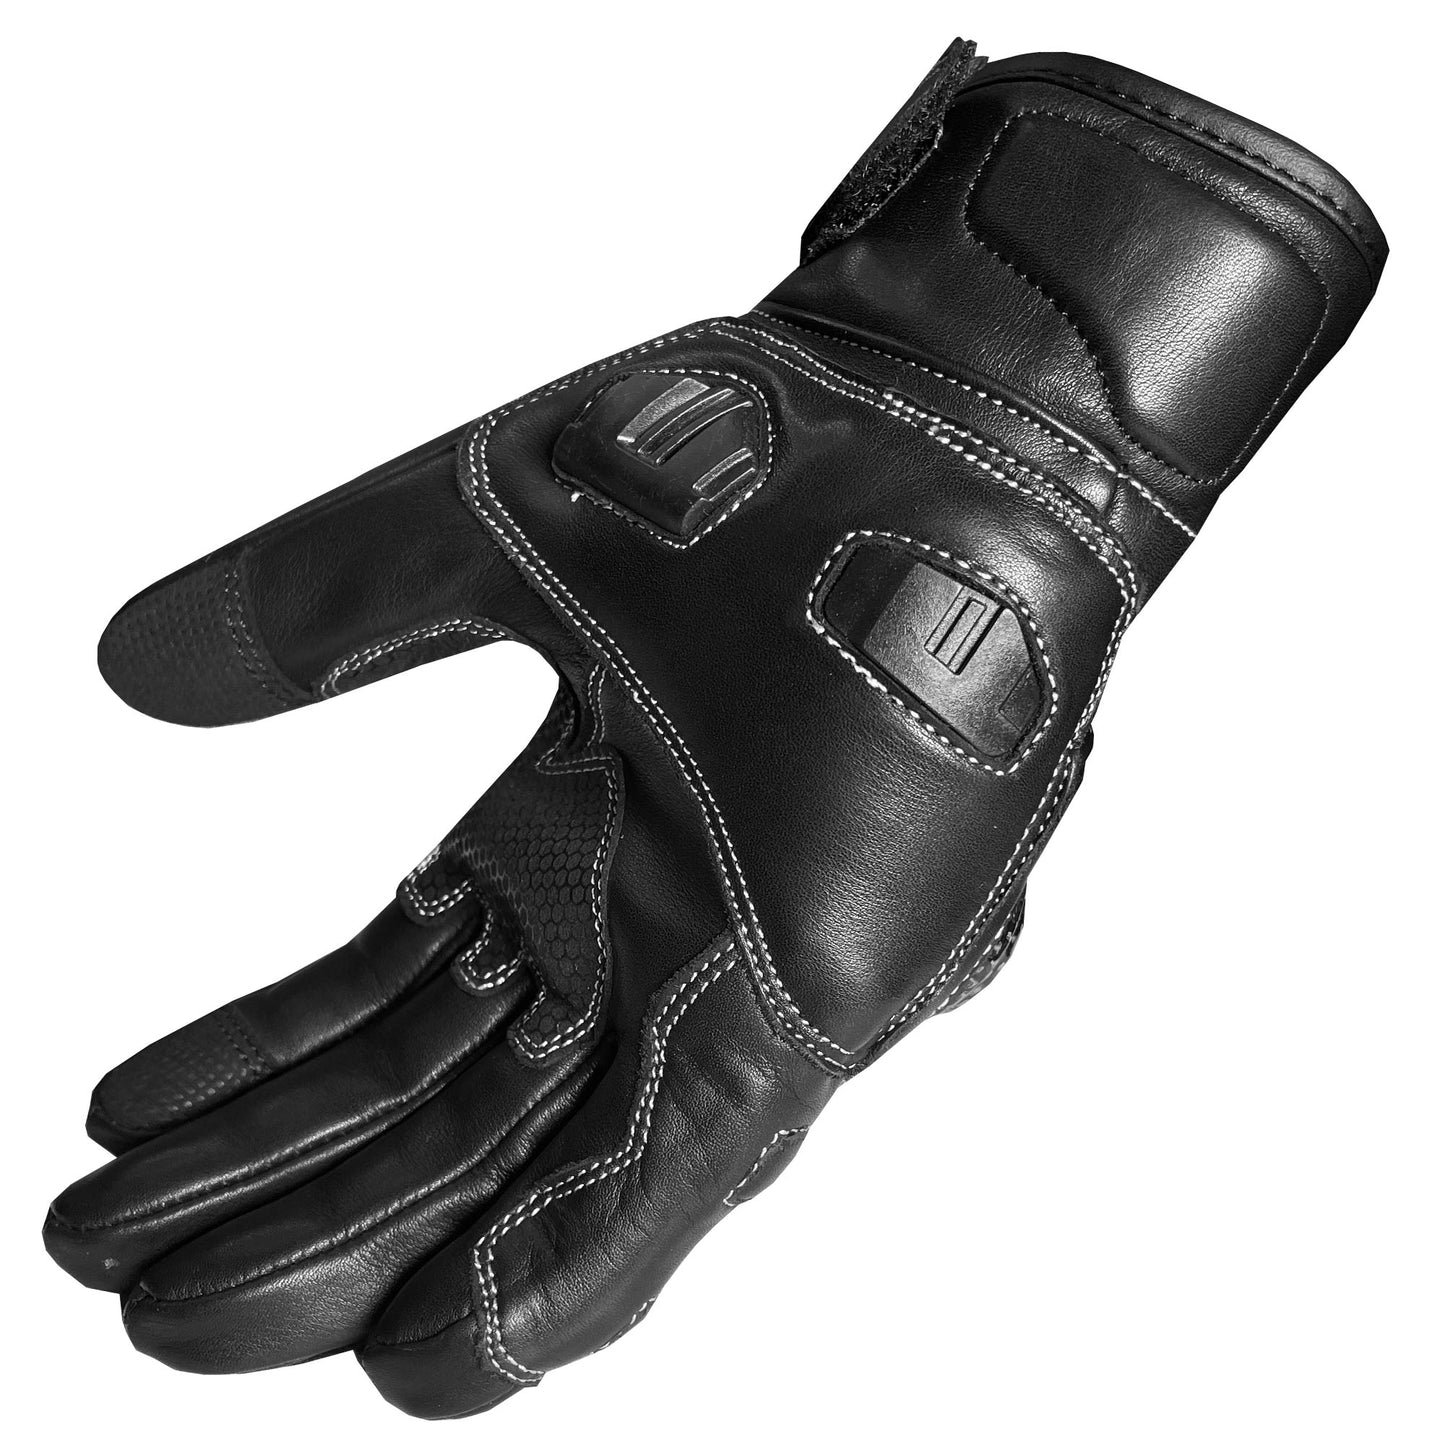 Men Aniline Cowhide Motorcycle Leather Gloves with Sliders BlackWhite